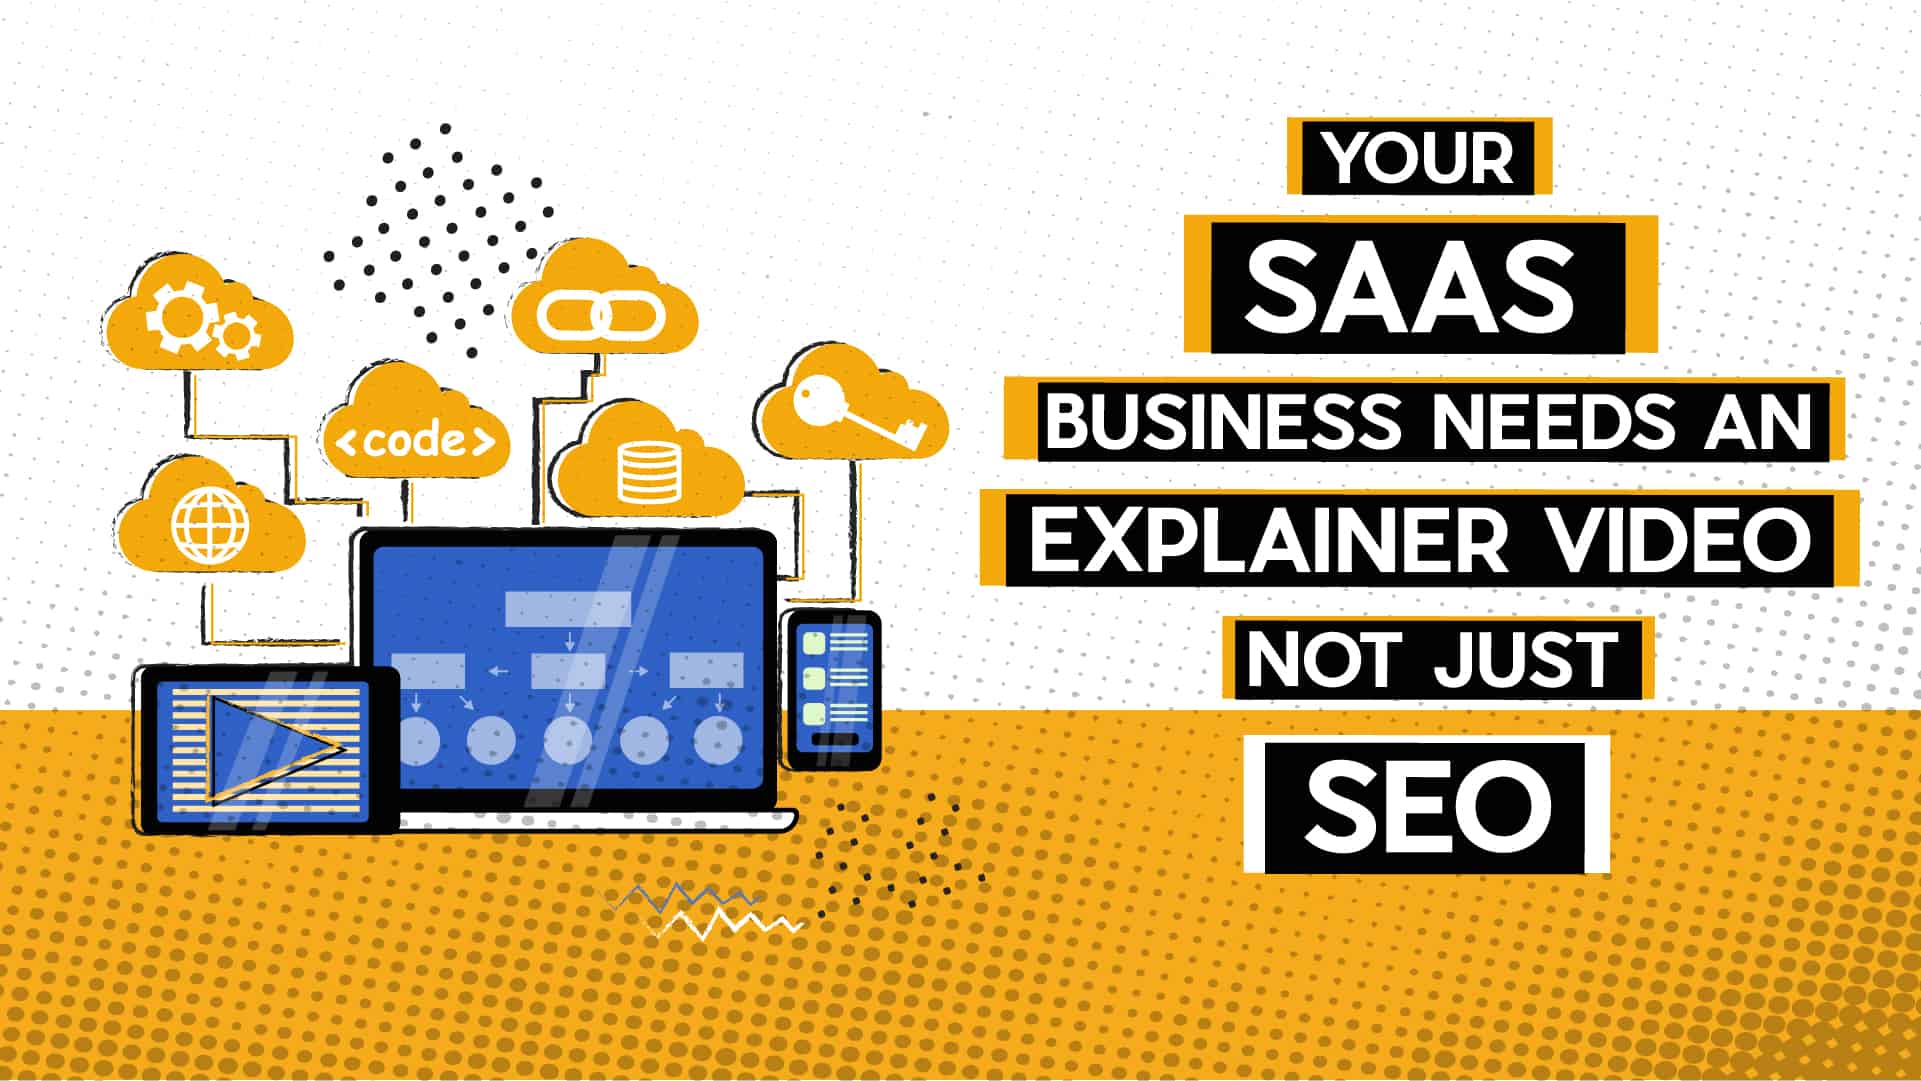 Your SAAS business needs an explainer video, Not SEO in 2019